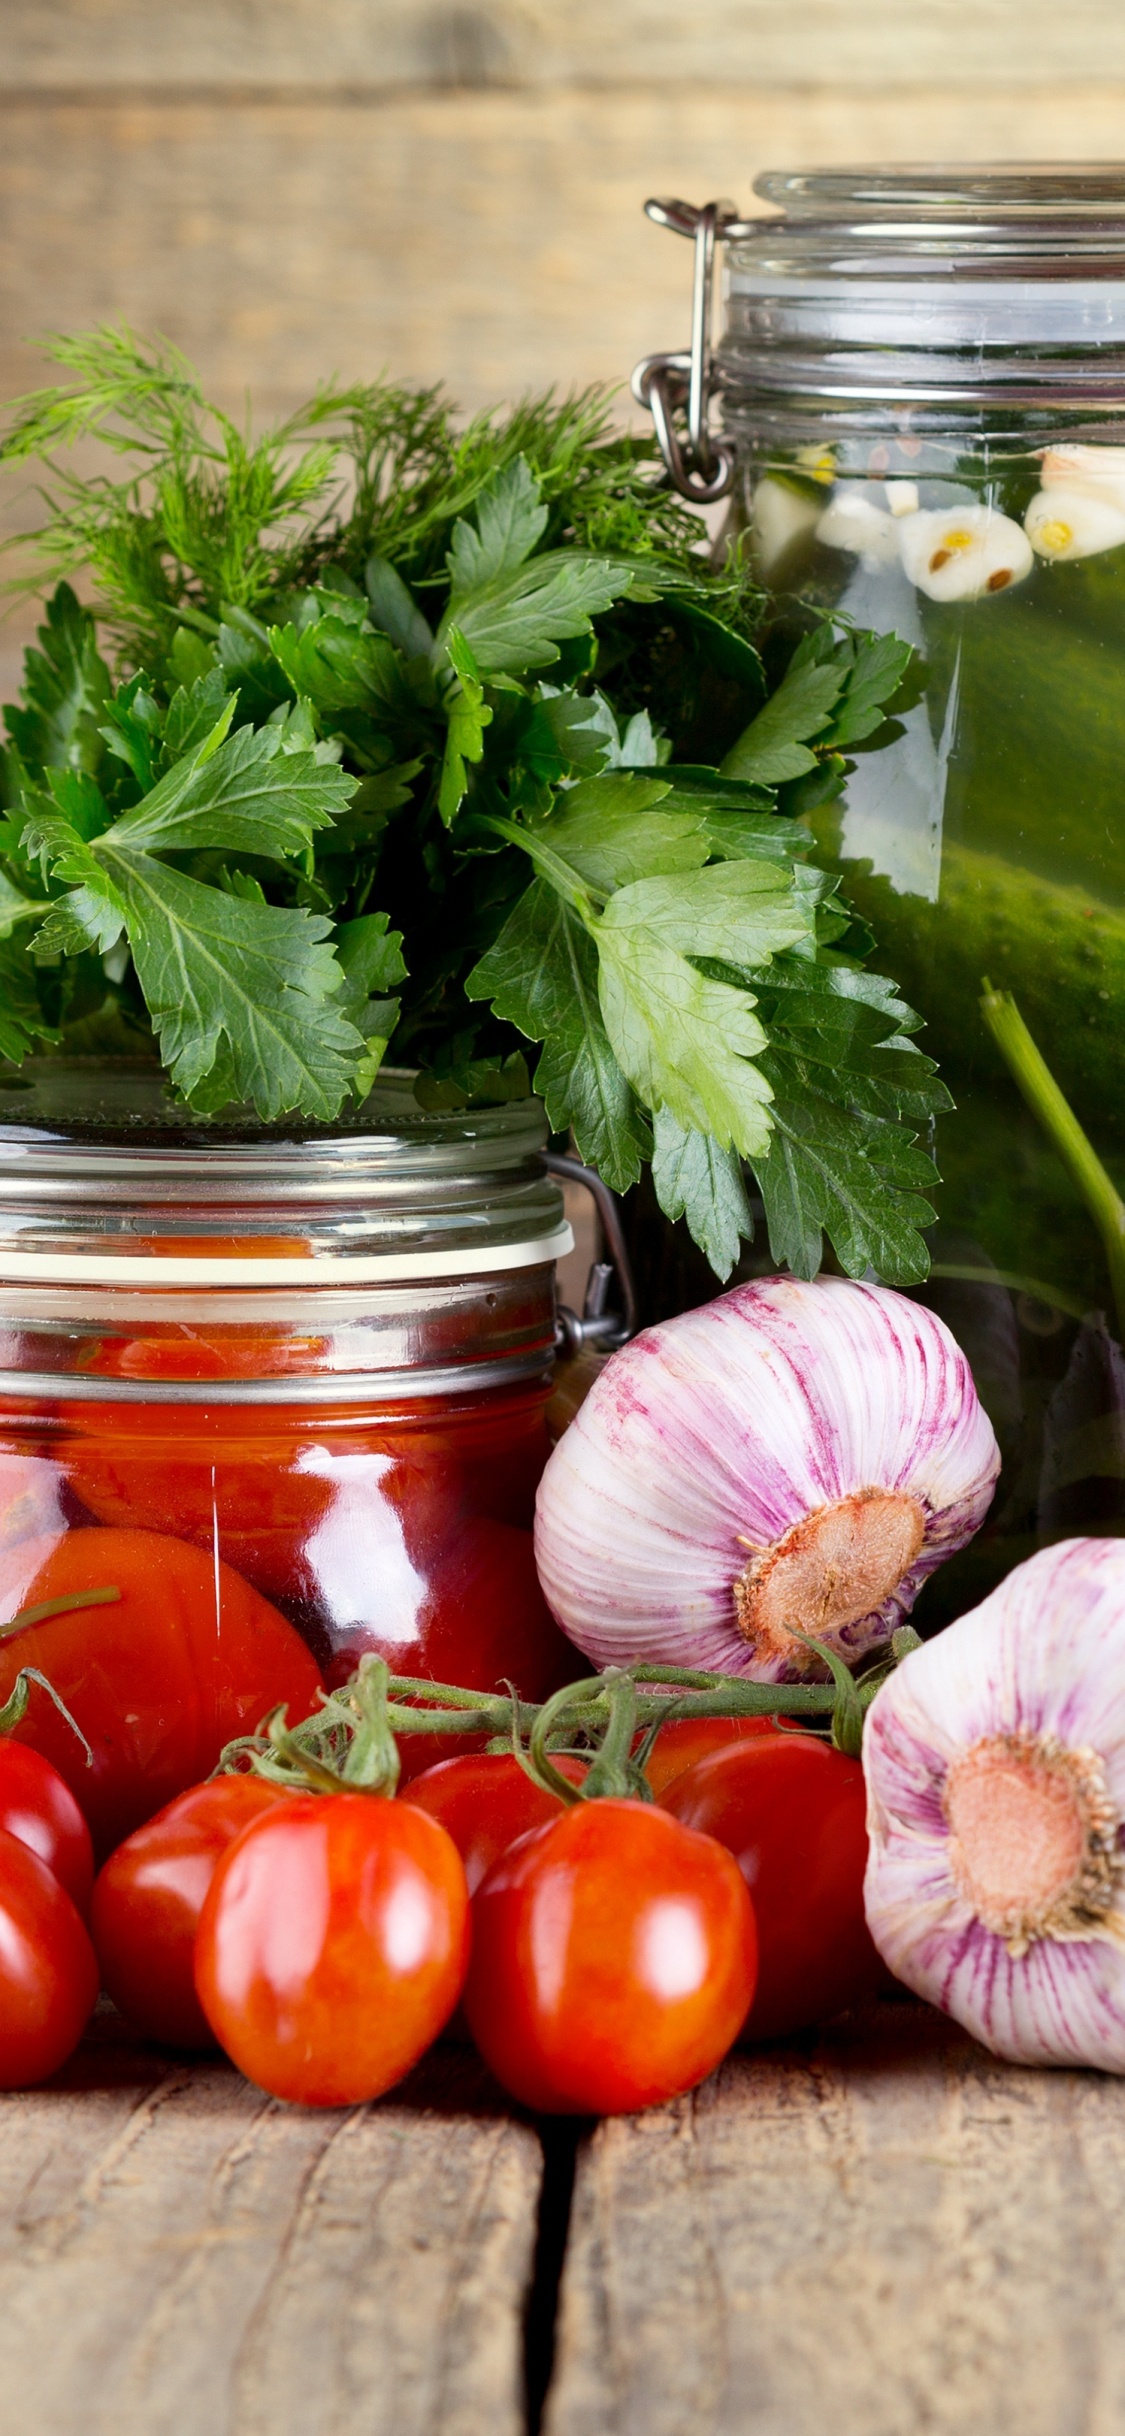 Red Tomatoes and Green Leaves in Clear Glass Jar. Wallpaper in 1125x2436 Resolution